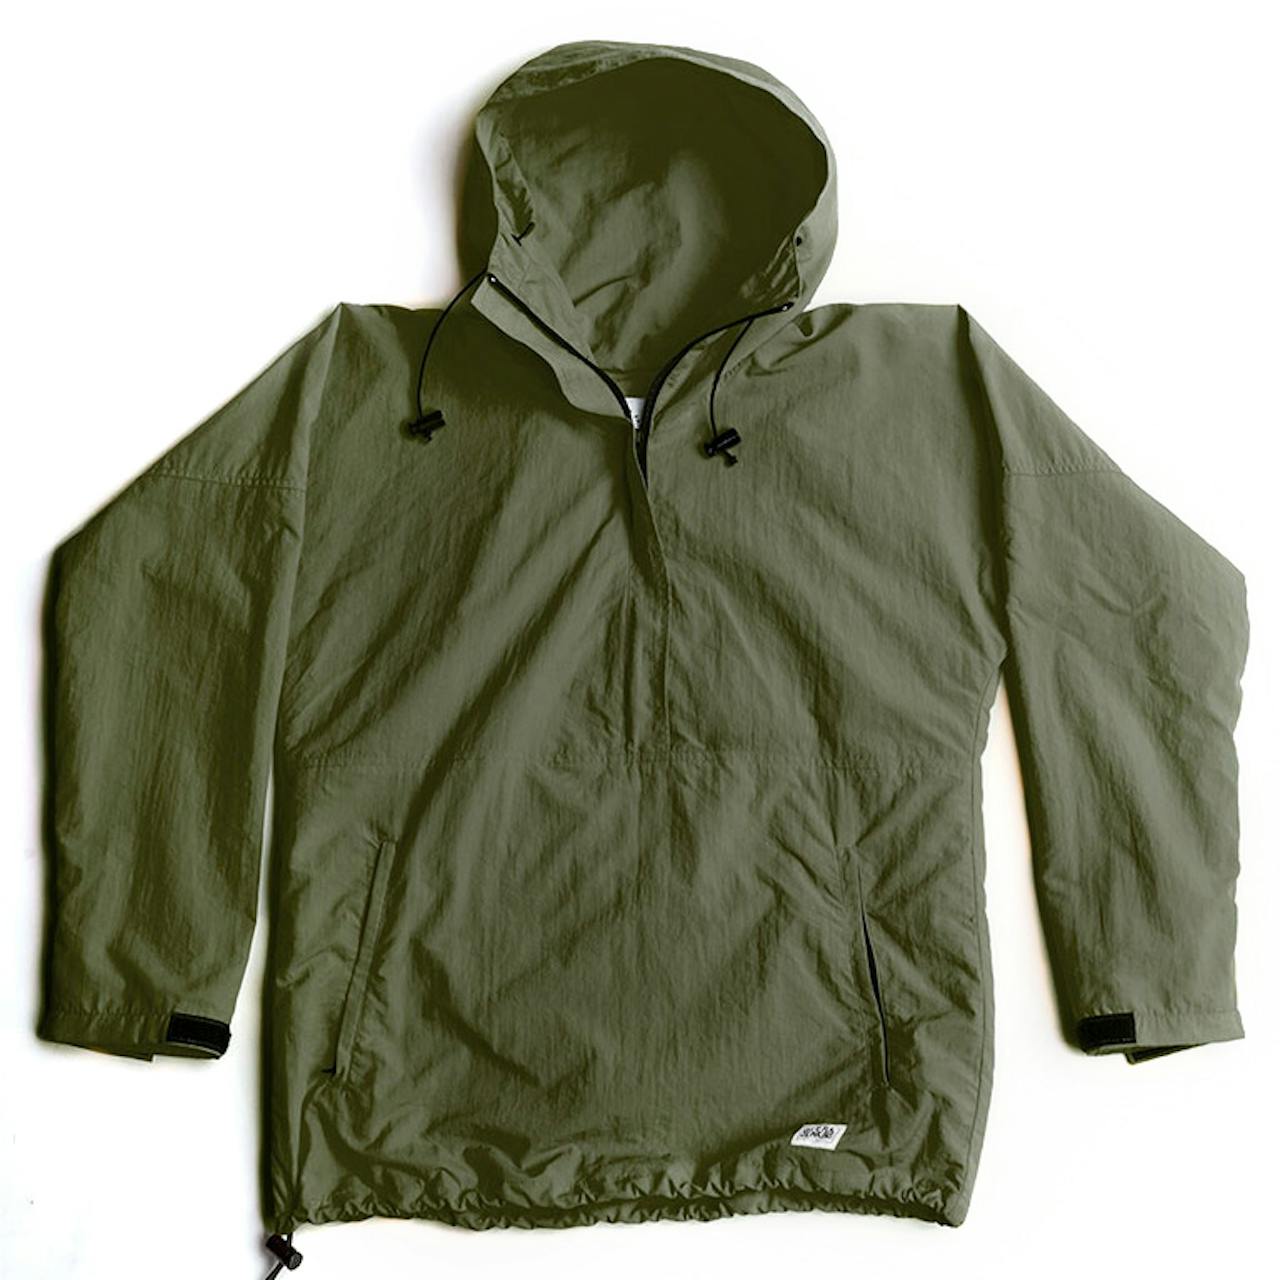 Dyer and Jenkins Packable Anorak Jacket